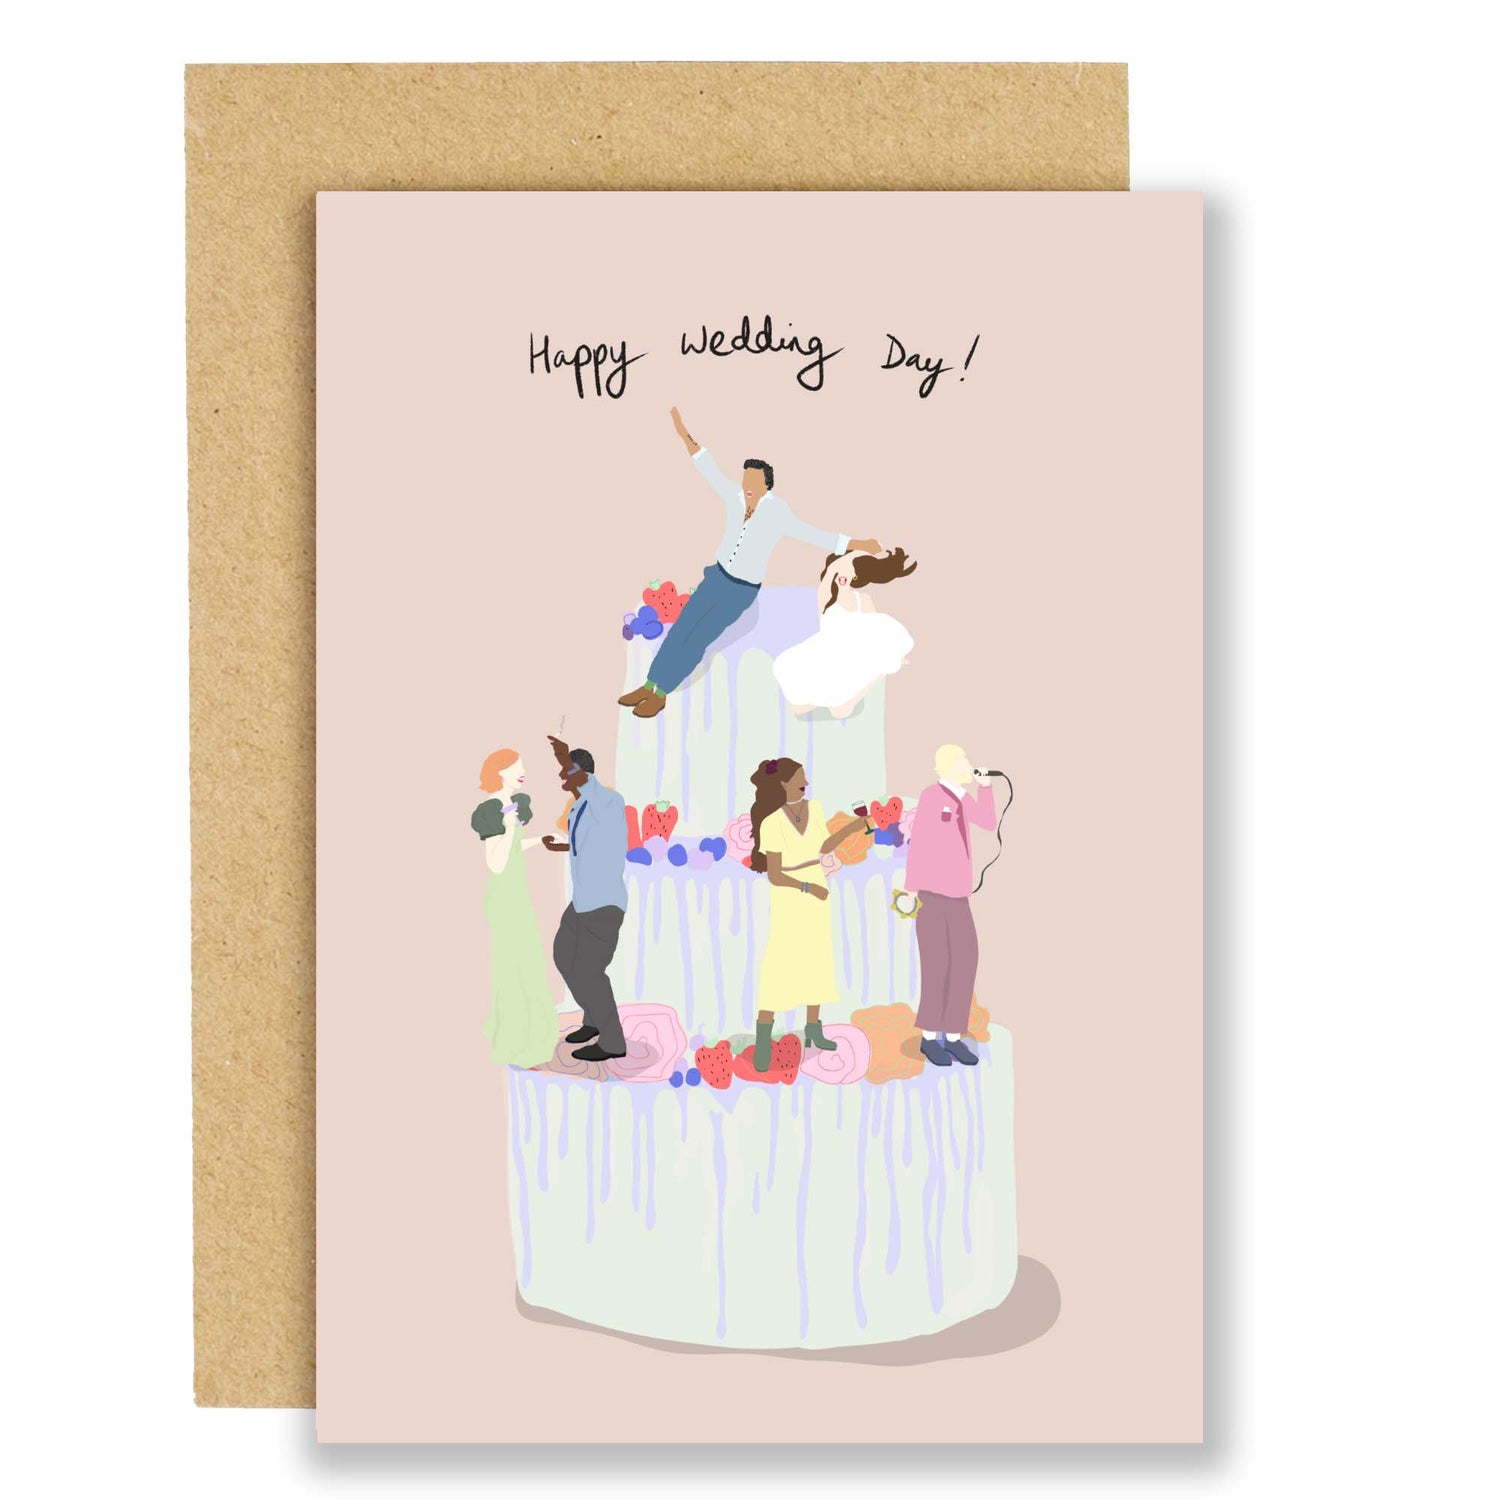 cool wedding day cards 